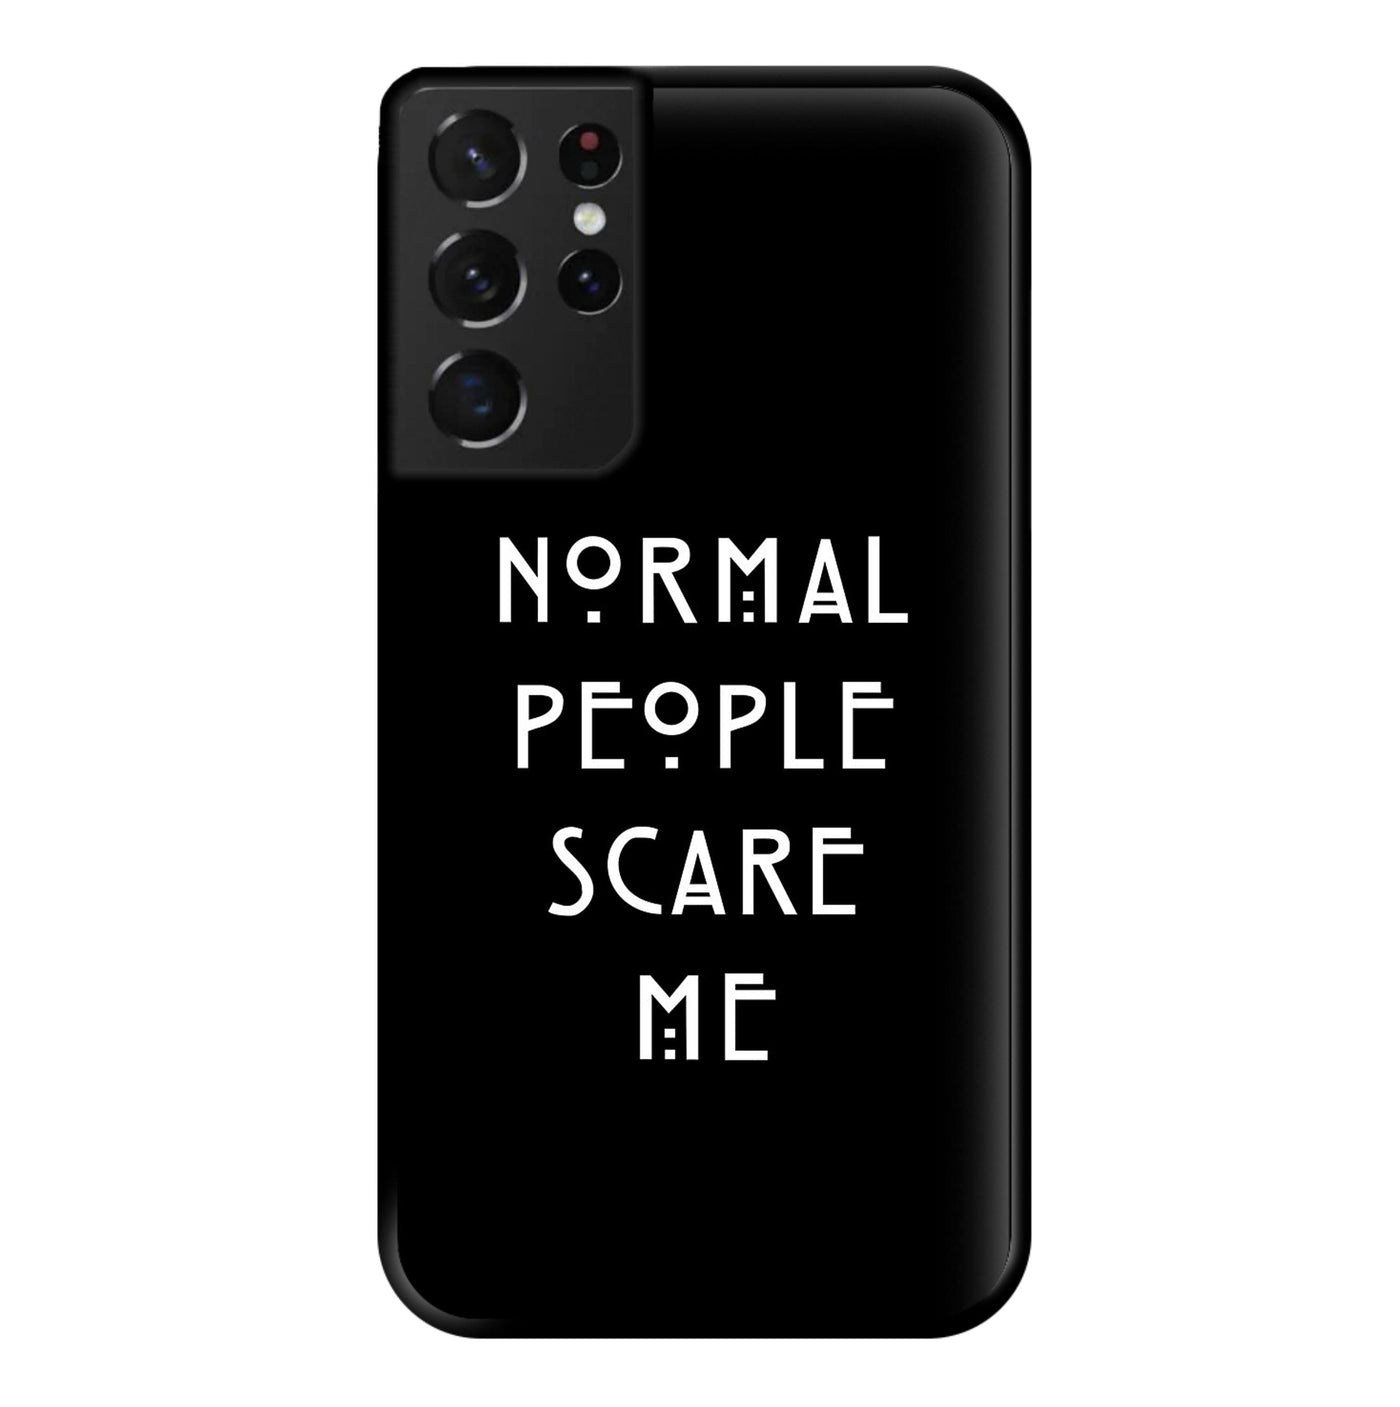 Normal People Scare Me - Black American Horror Story Phone Case